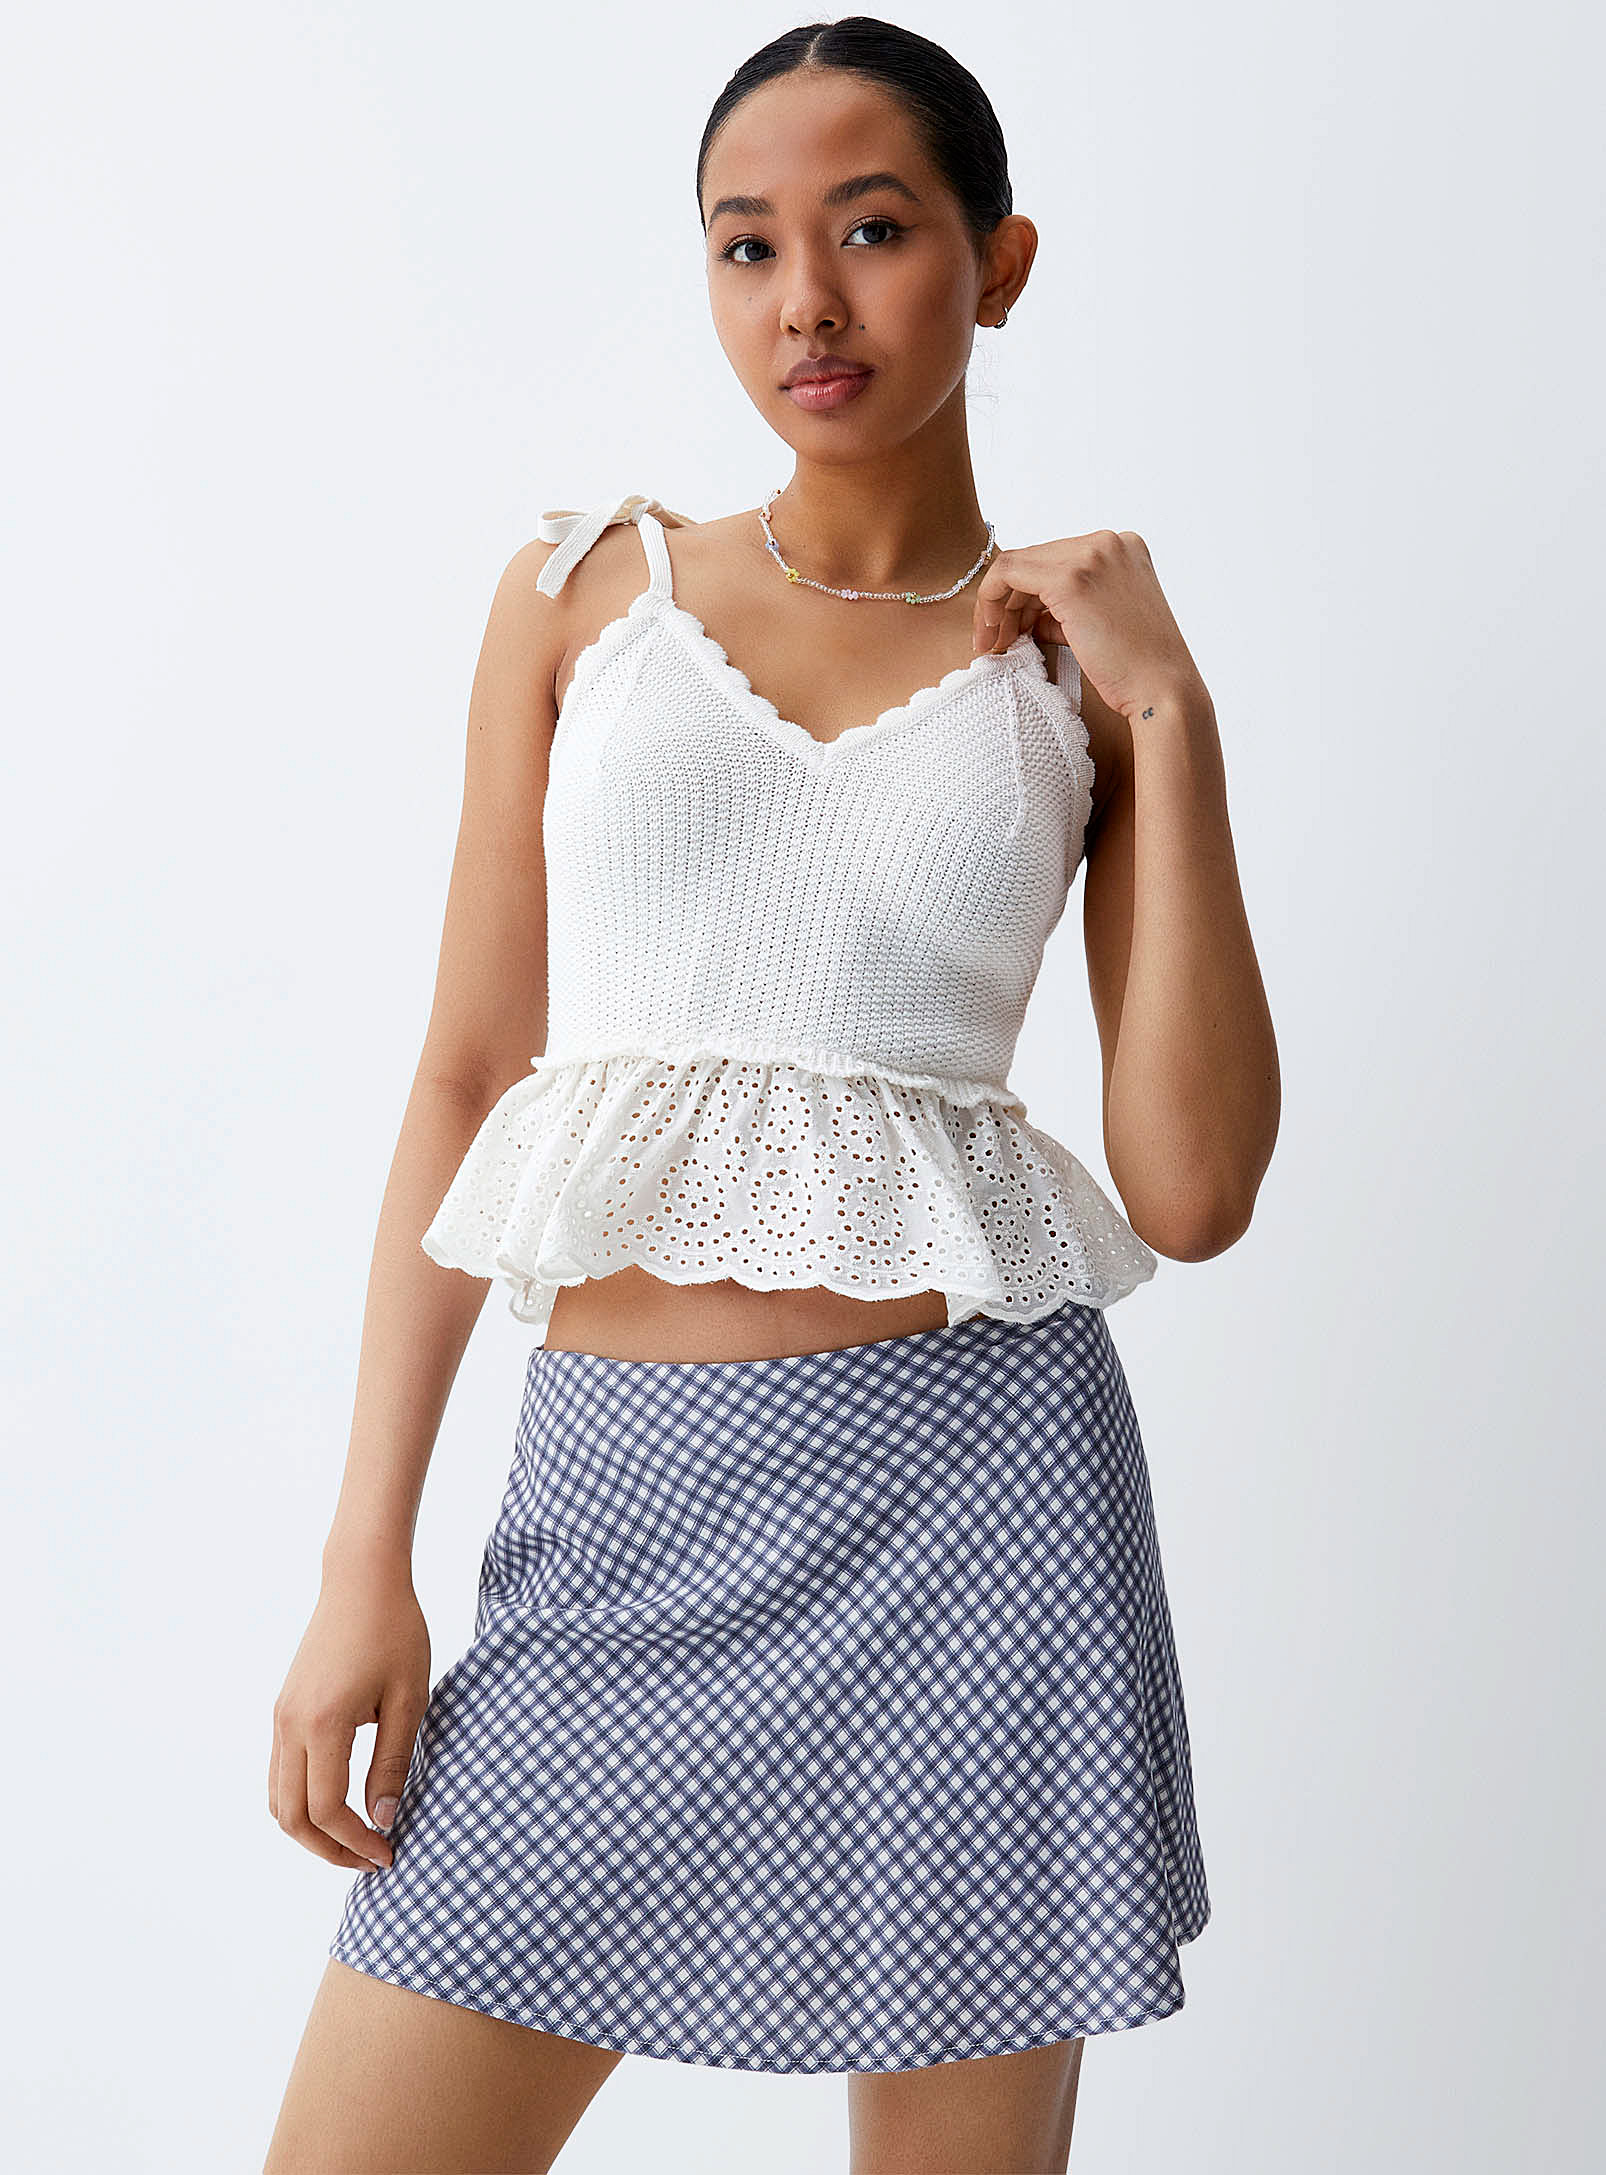 Only - La camisole tricot et broderie anglaise